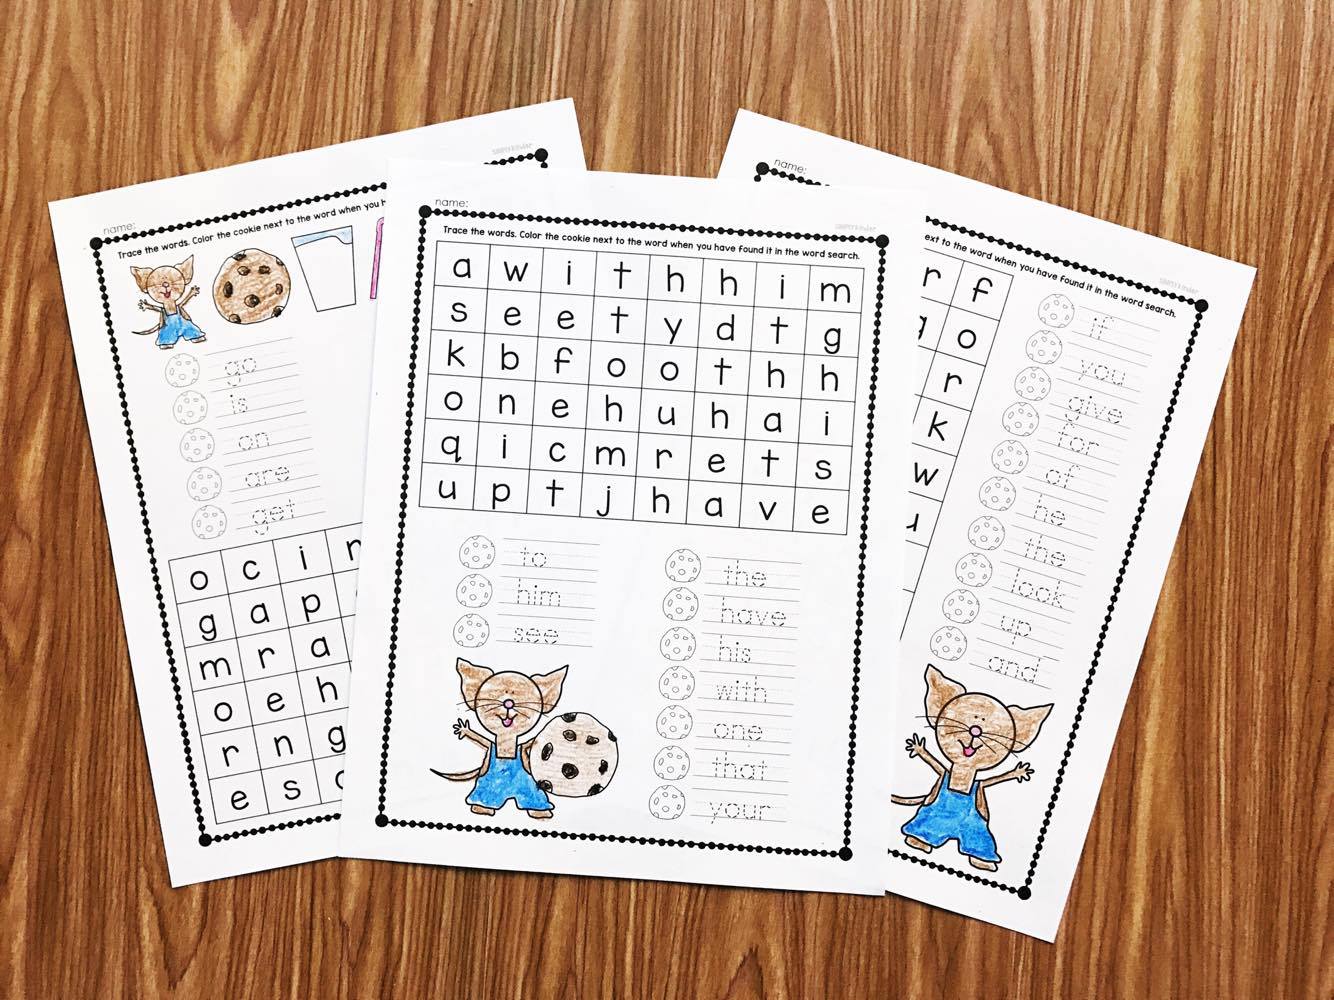 If You Give a Mouse a Cookie Activity perfect for kindergarten and first grade students to practice sight words.